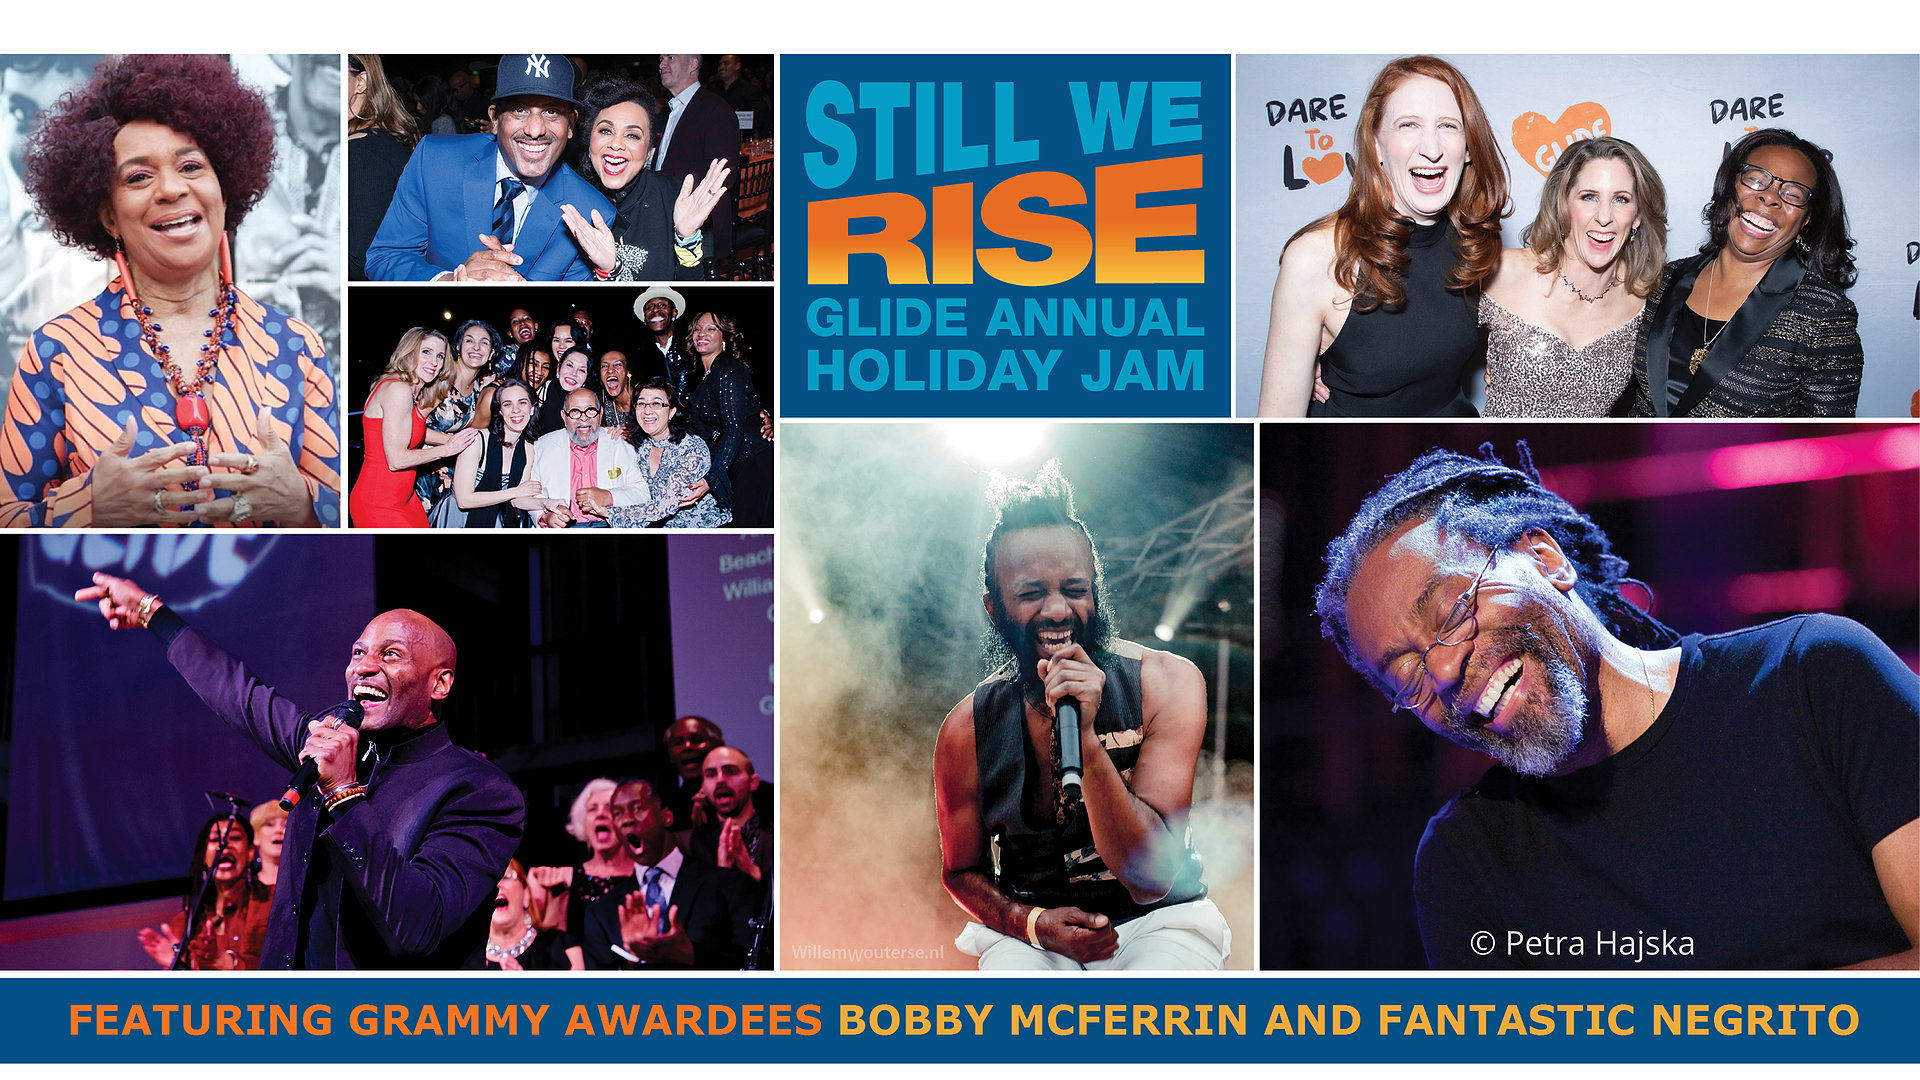 GLIDE’s Holiday Jam Benefit Concert Returns to The Masonic w/ Bobby McFerrin and Fantastic Negrito